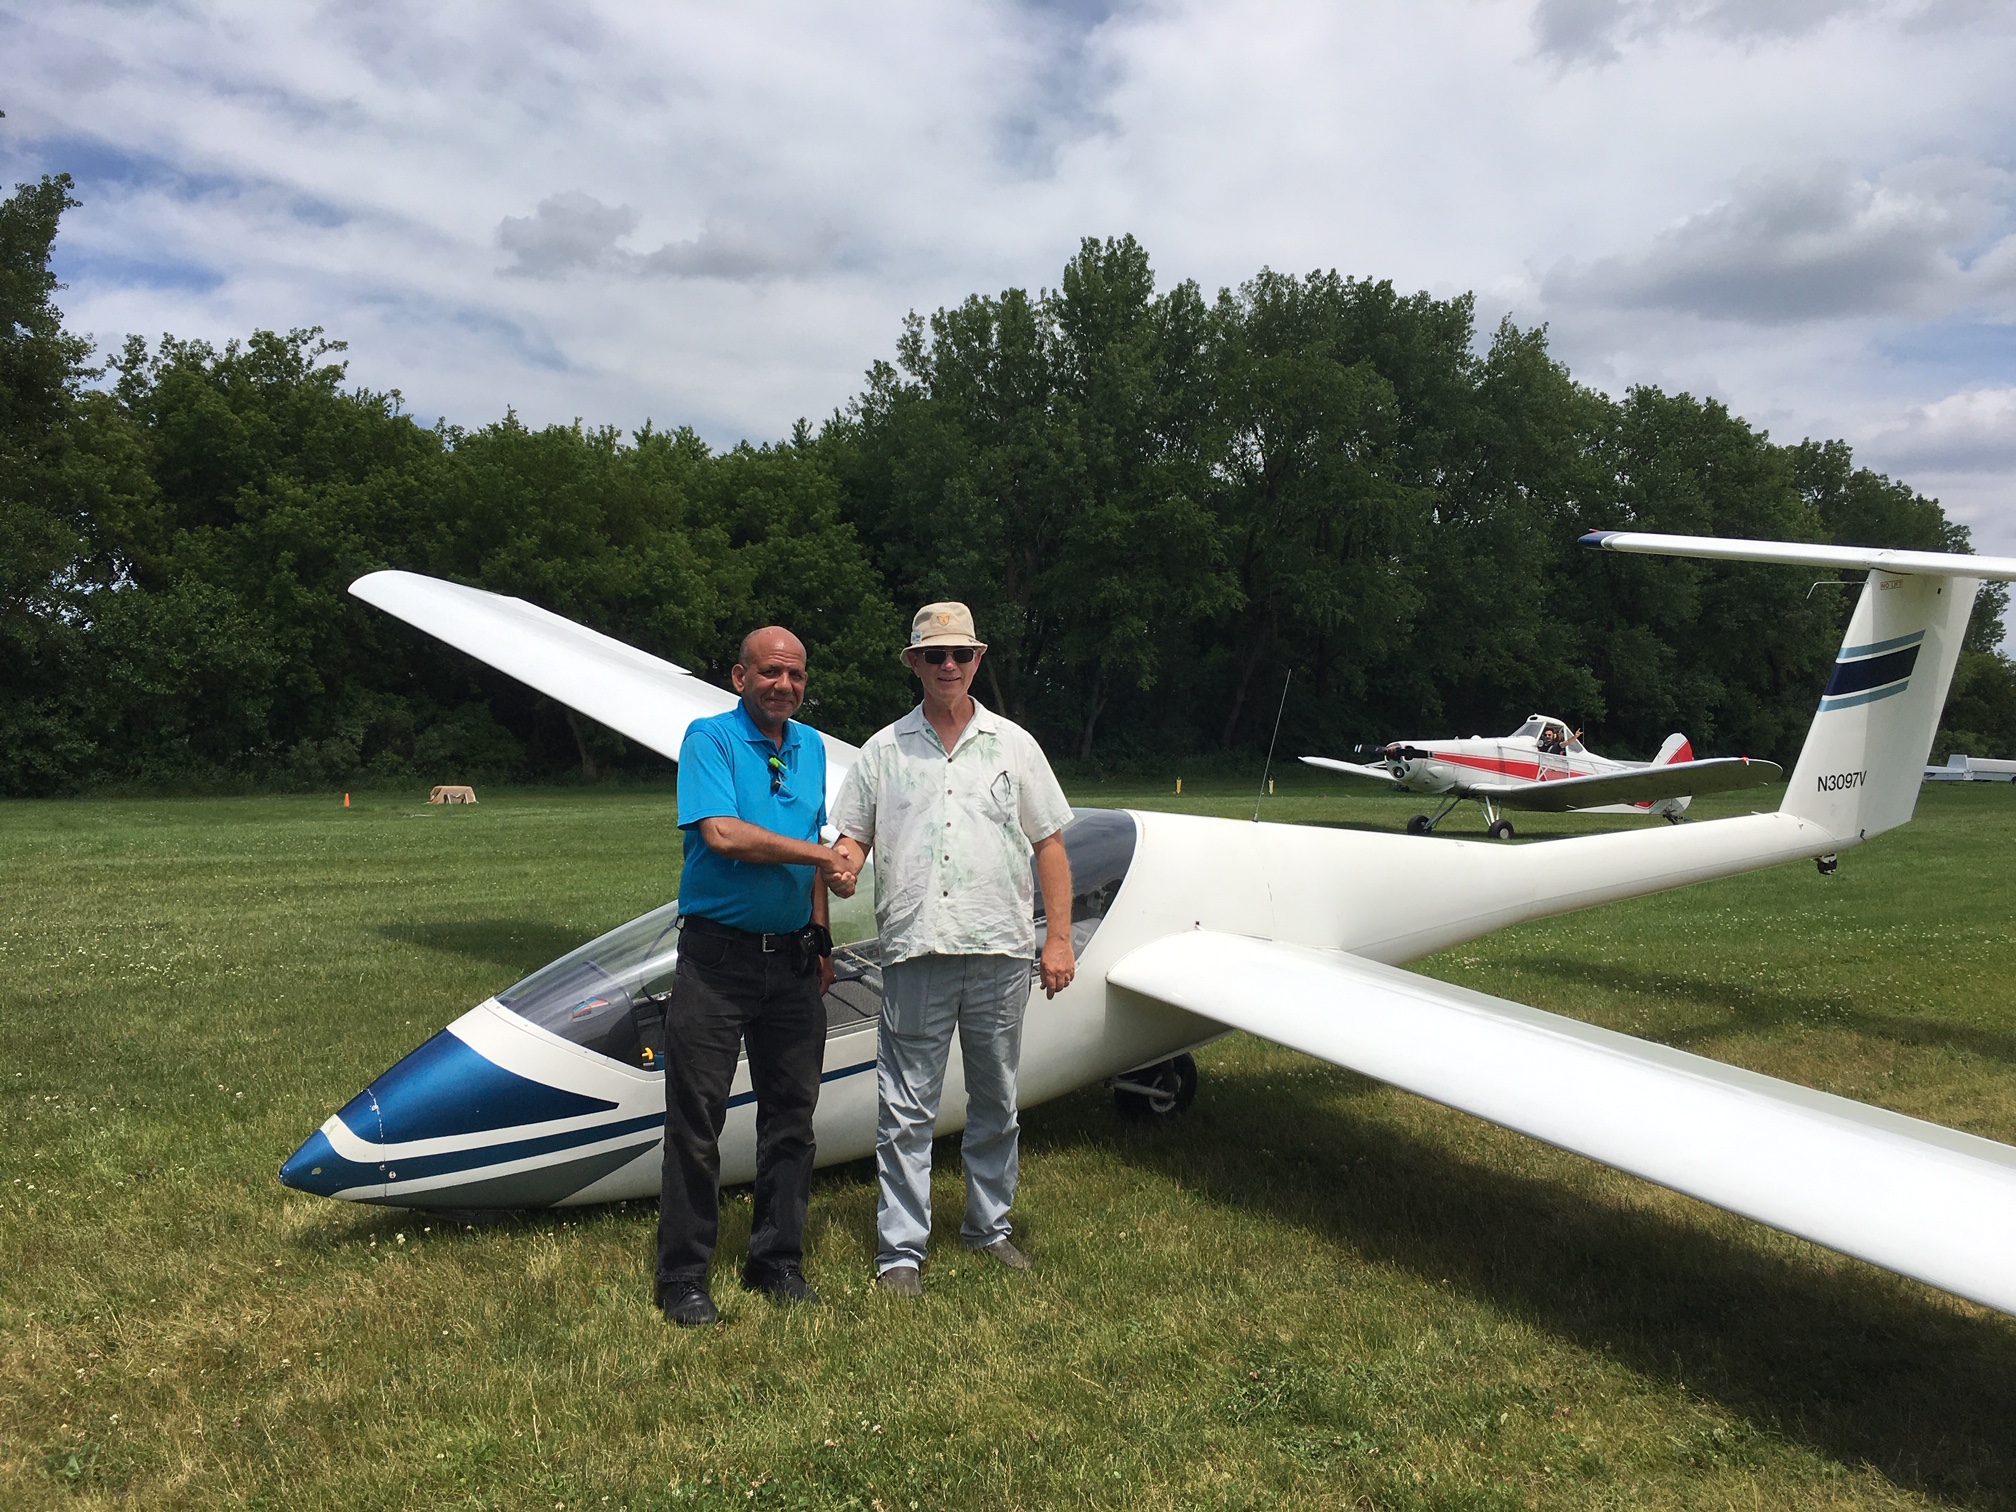 Steve Snyder congratulates Frank Smith on his solo flight with TowPilot Aaron in the background